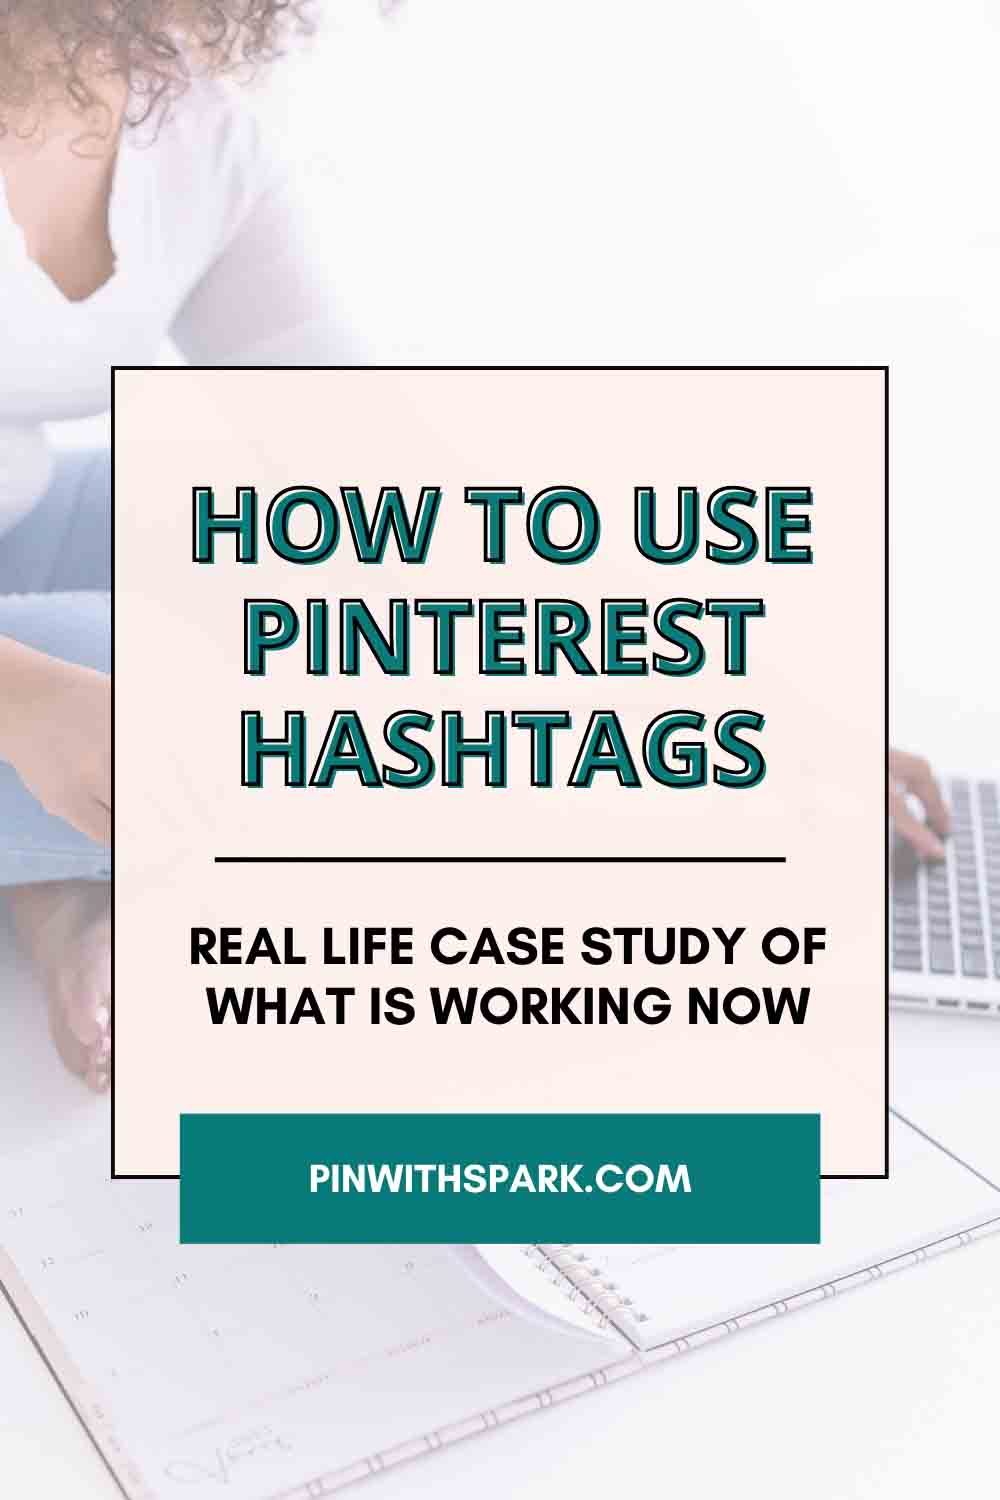 How to Use Pinterest hashtags